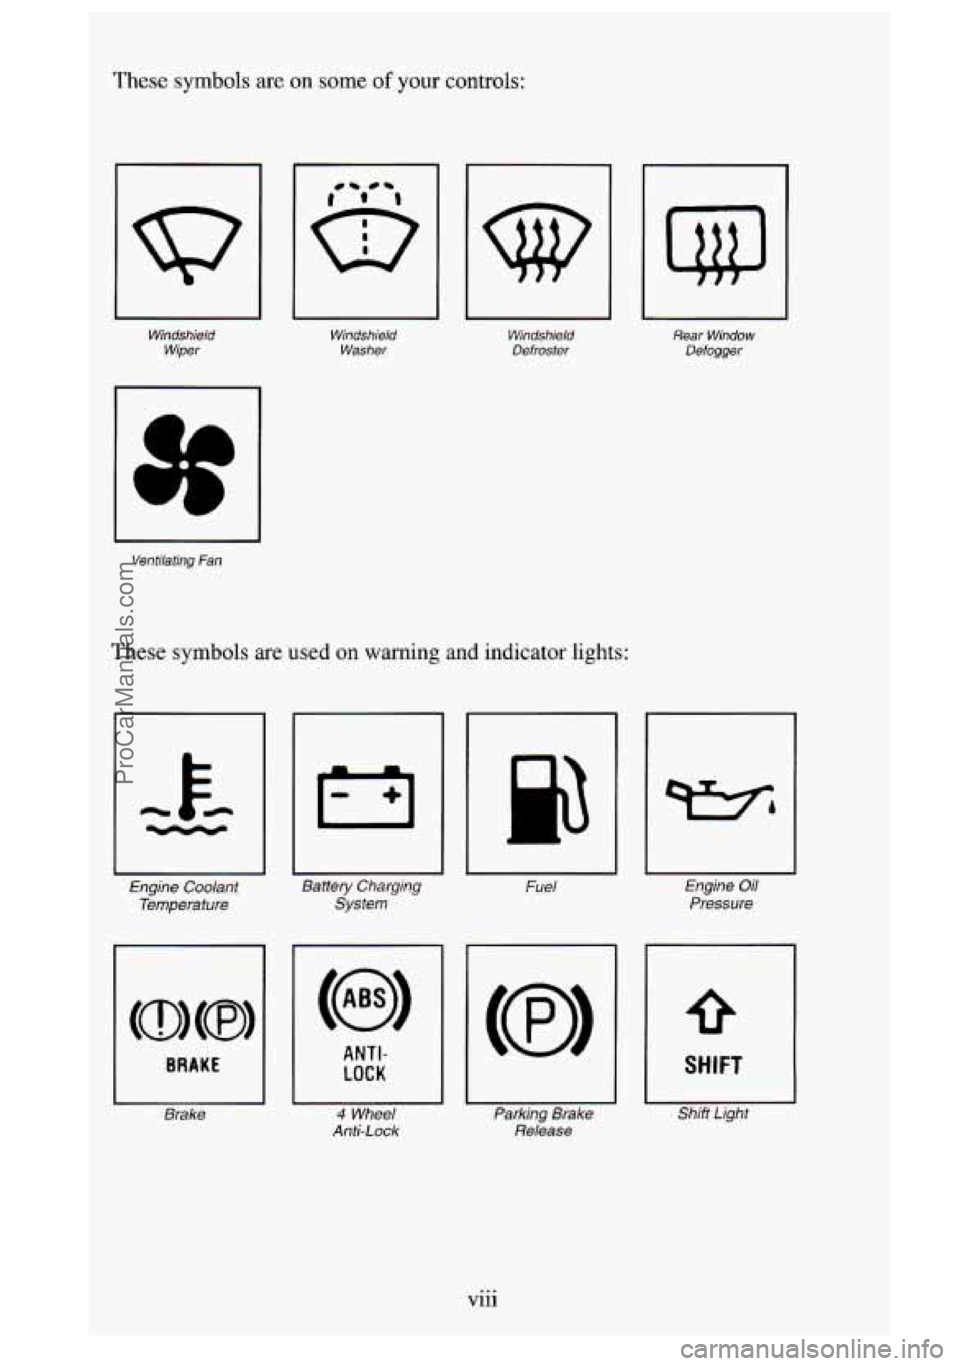 GMC SIERRA 1995  Owners Manual These symbols are on some of your controls: 
uu 
Windshield Wiper  Windshield 
Washer 
I I 
Windshield Defroster 
Ventilating Fan 
These symbols are used on  warning and  indicator lights: 
Engine  Co